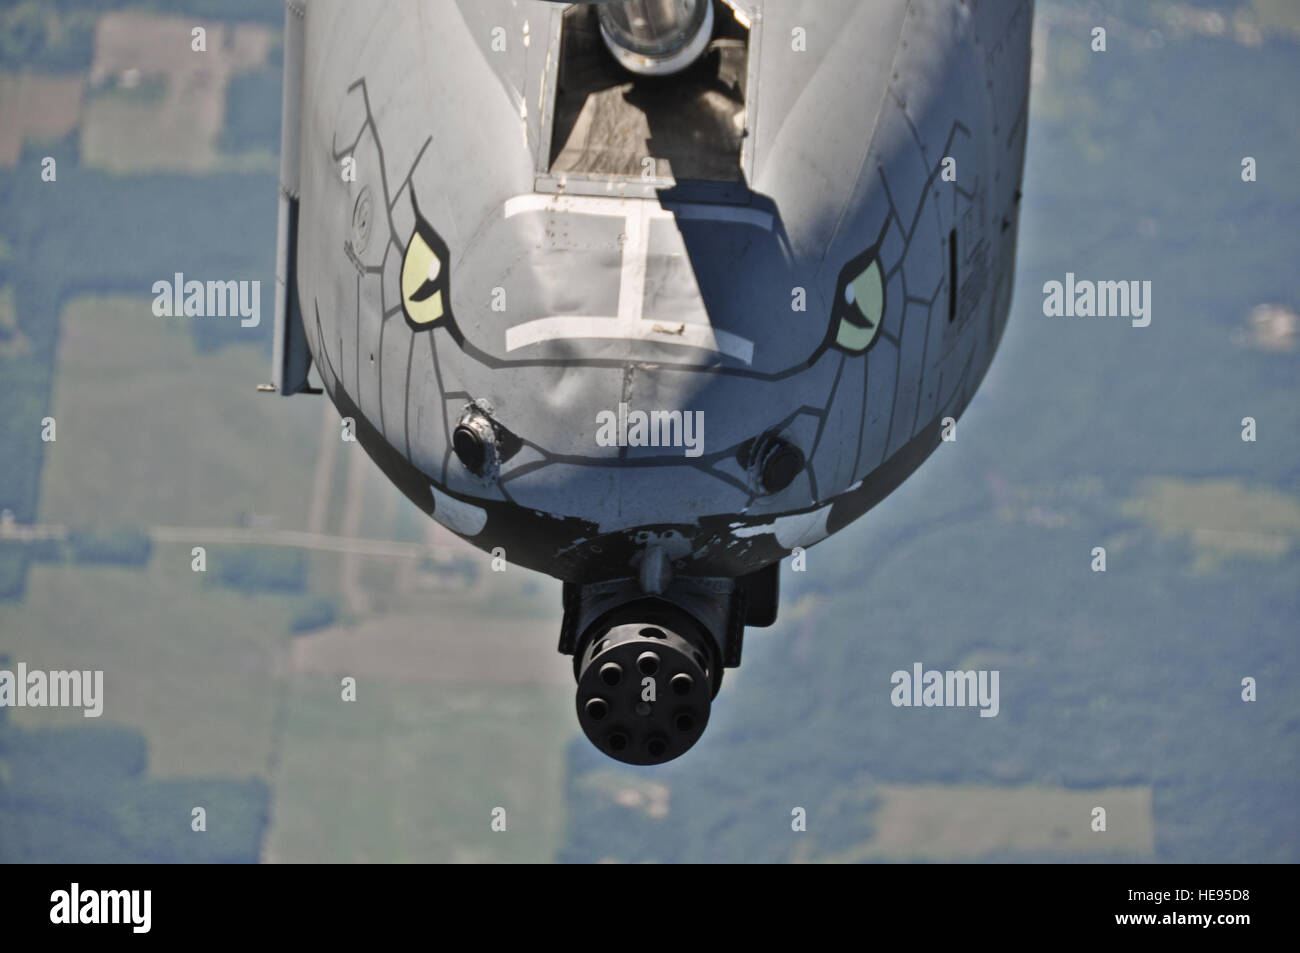 An A-10 Thunderbolt II from Selfridge Air National Guard Base, MI, displaying serpentine noseart around the 30 mm GAU-8/A Gatling Gun while being mid-air refueled during a boss lift and training flight over Michigan on July 11, 2012. The A-10 host an assortment of armament, with the GAU-8/A cannon able to dispense 3,900 rounds per minute. : Staff Sgt. Jeremy M. Wilson Stock Photo